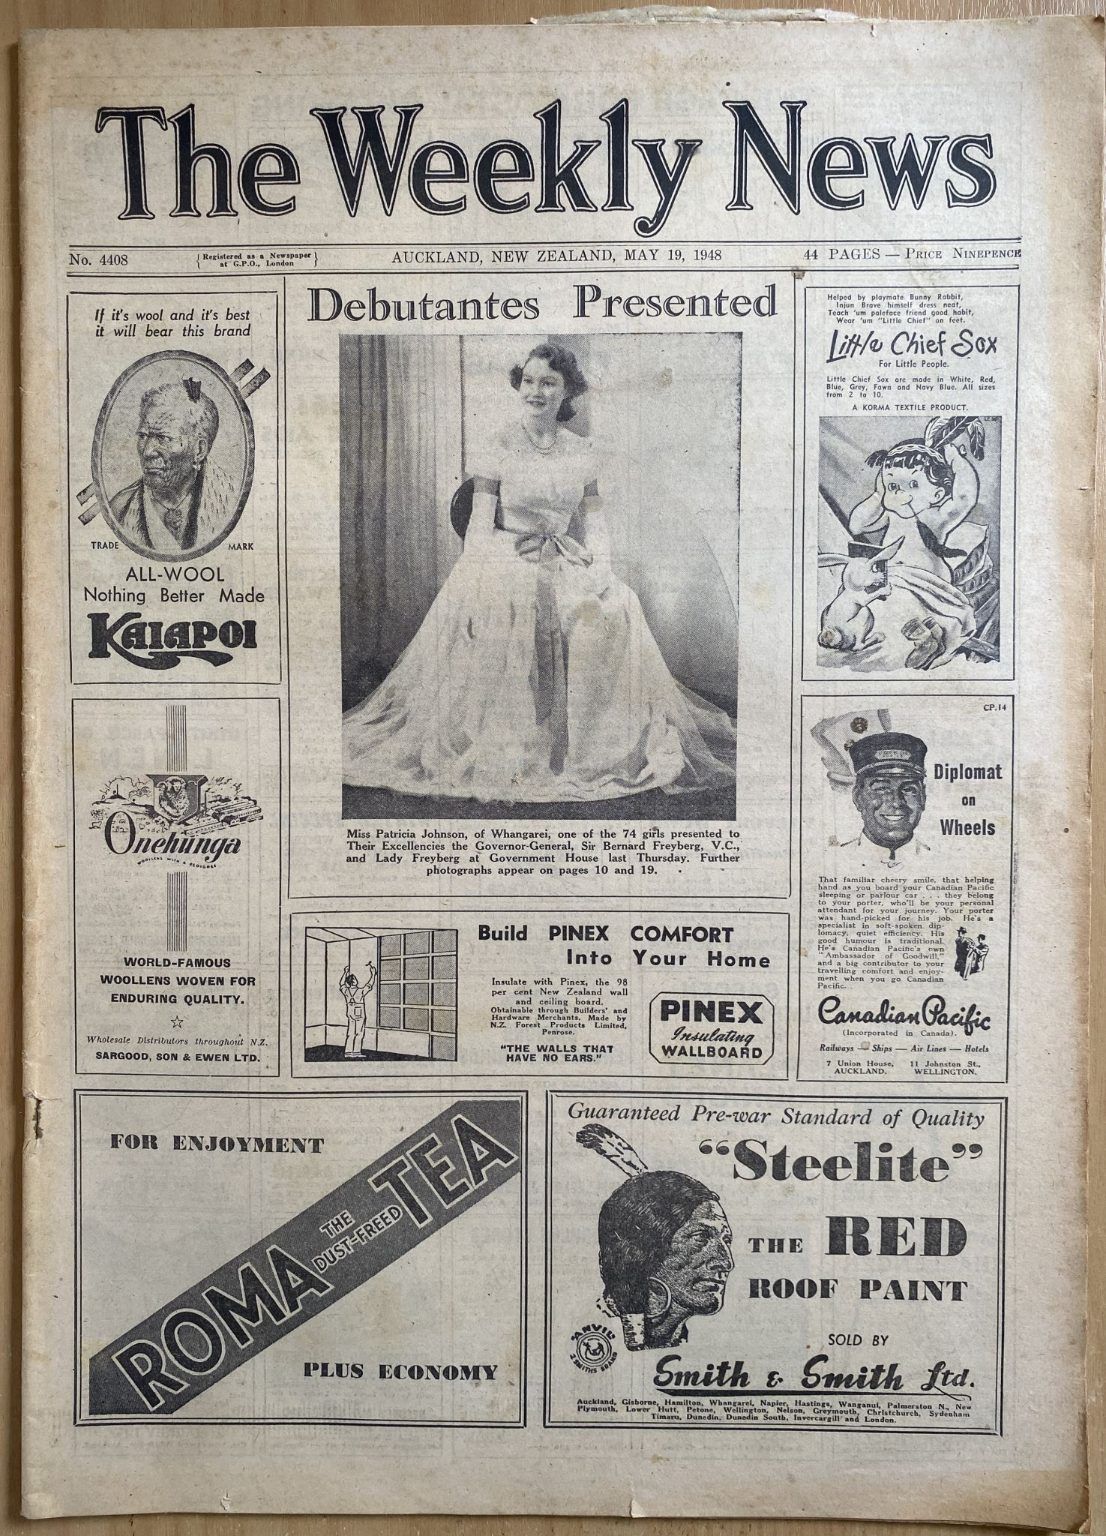 OLD NEWSPAPER: The Weekly News - No. 4408, 19 May 1948